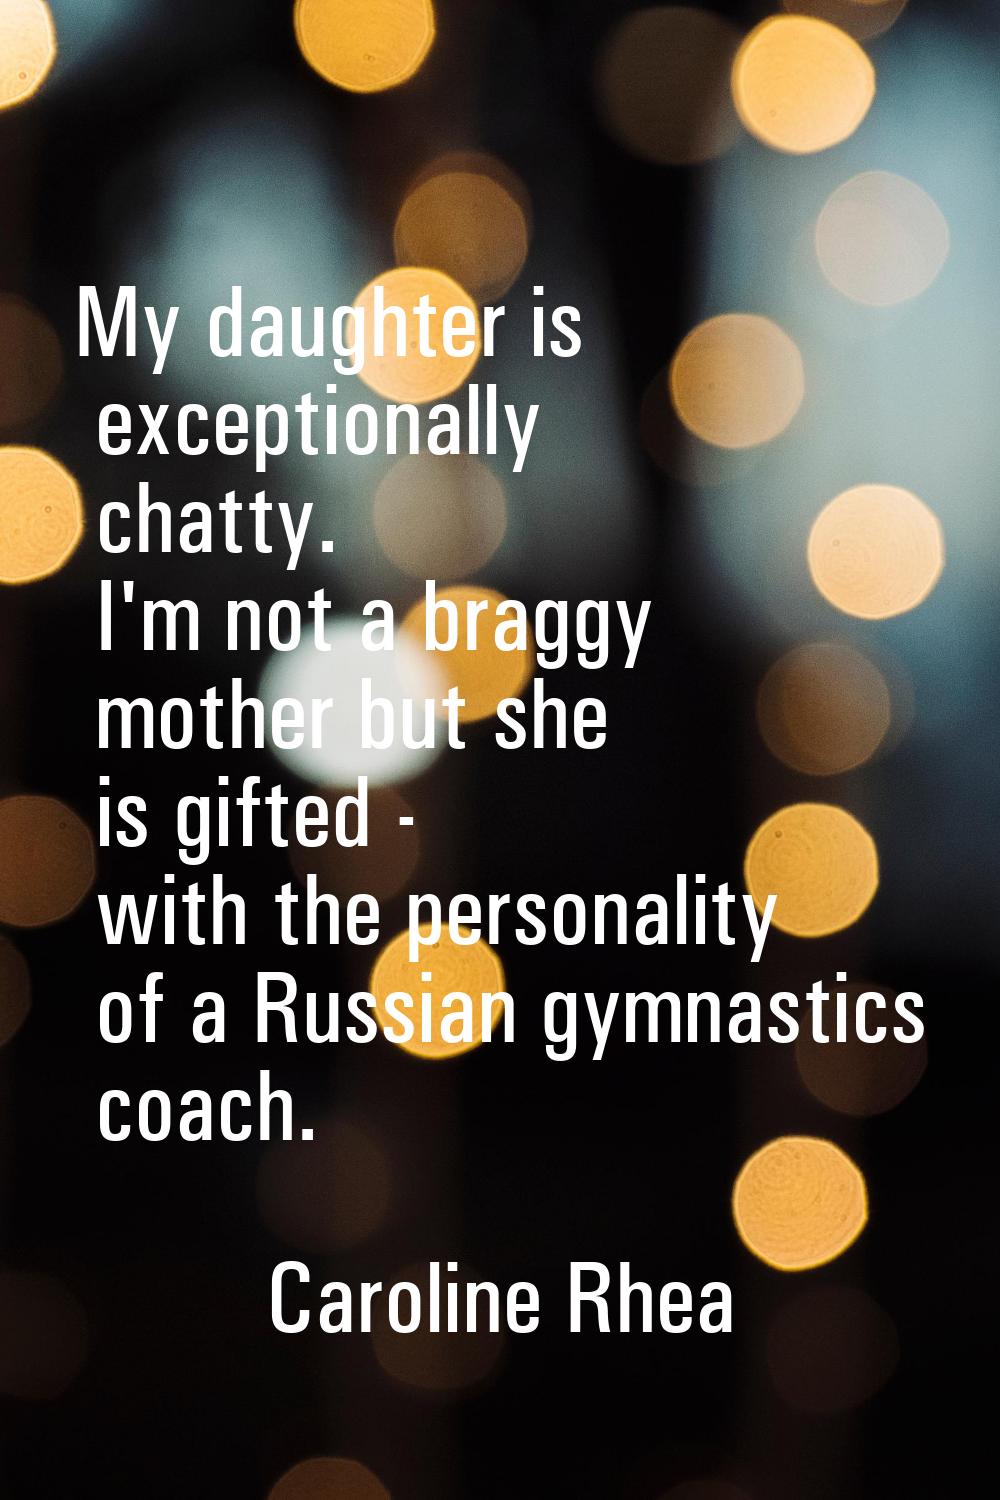 My daughter is exceptionally chatty. I'm not a braggy mother but she is gifted - with the personali